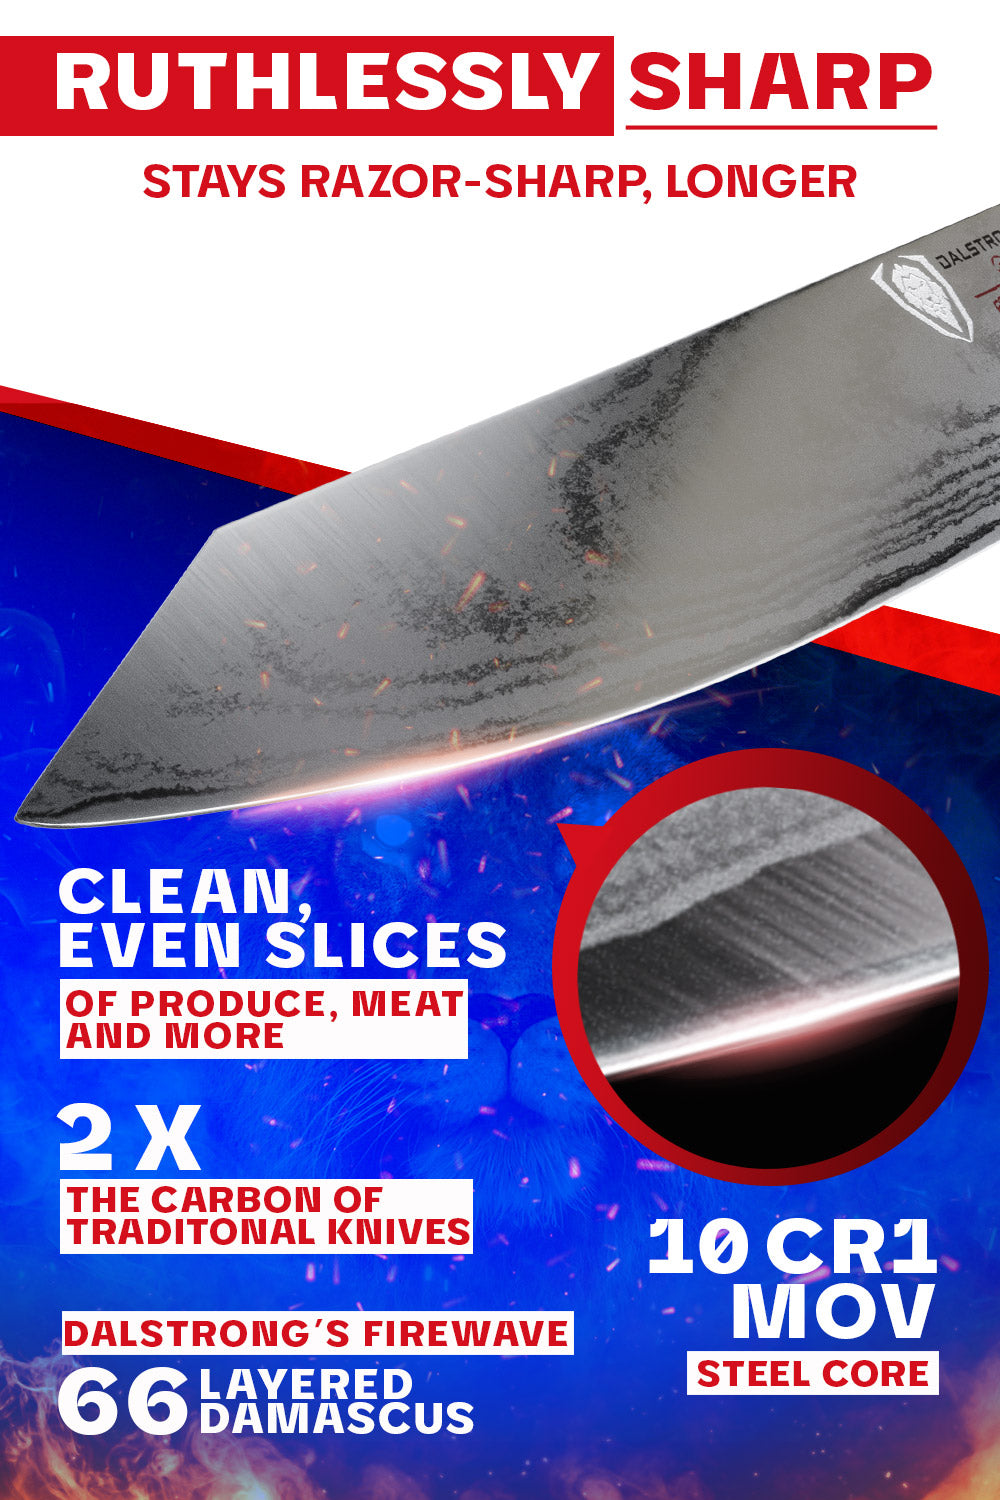 Dalstrong firestorm alpha series 9.5 inch chef knife featuring it's razor sharp blade.